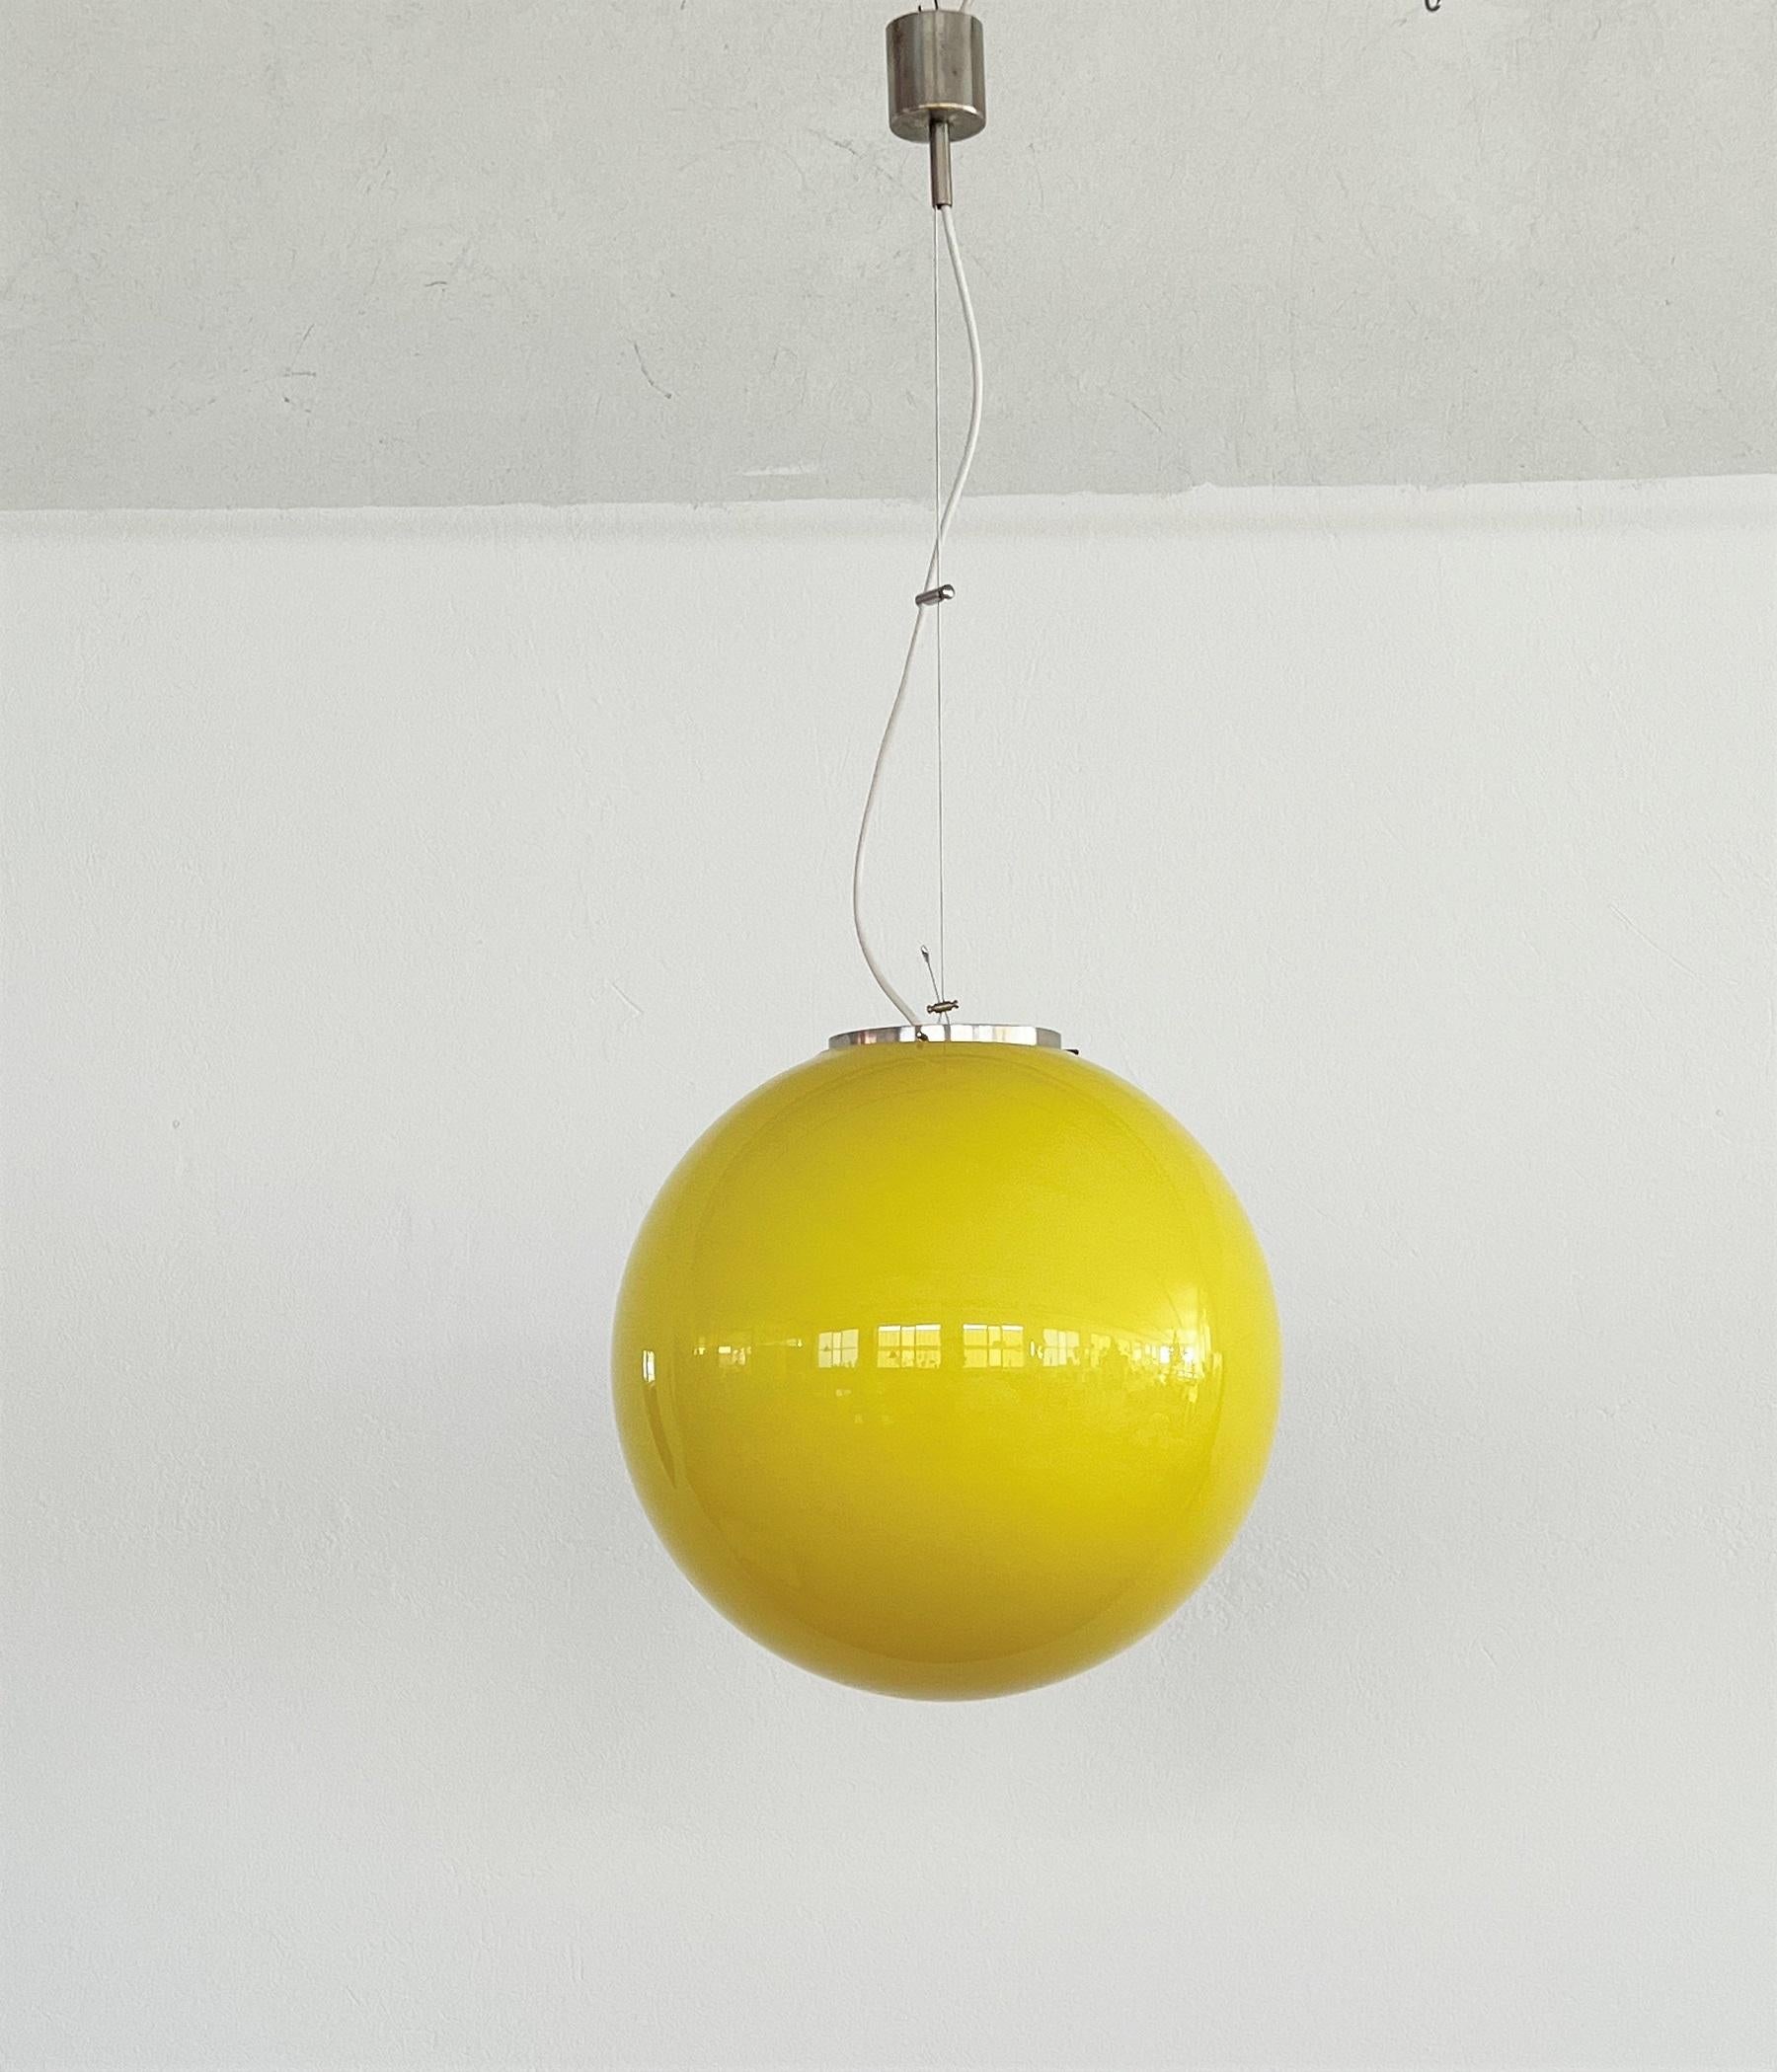 Italian Midcentury Murano Glass Globe Chandelier in Yellow and Plated Brass For Sale 5